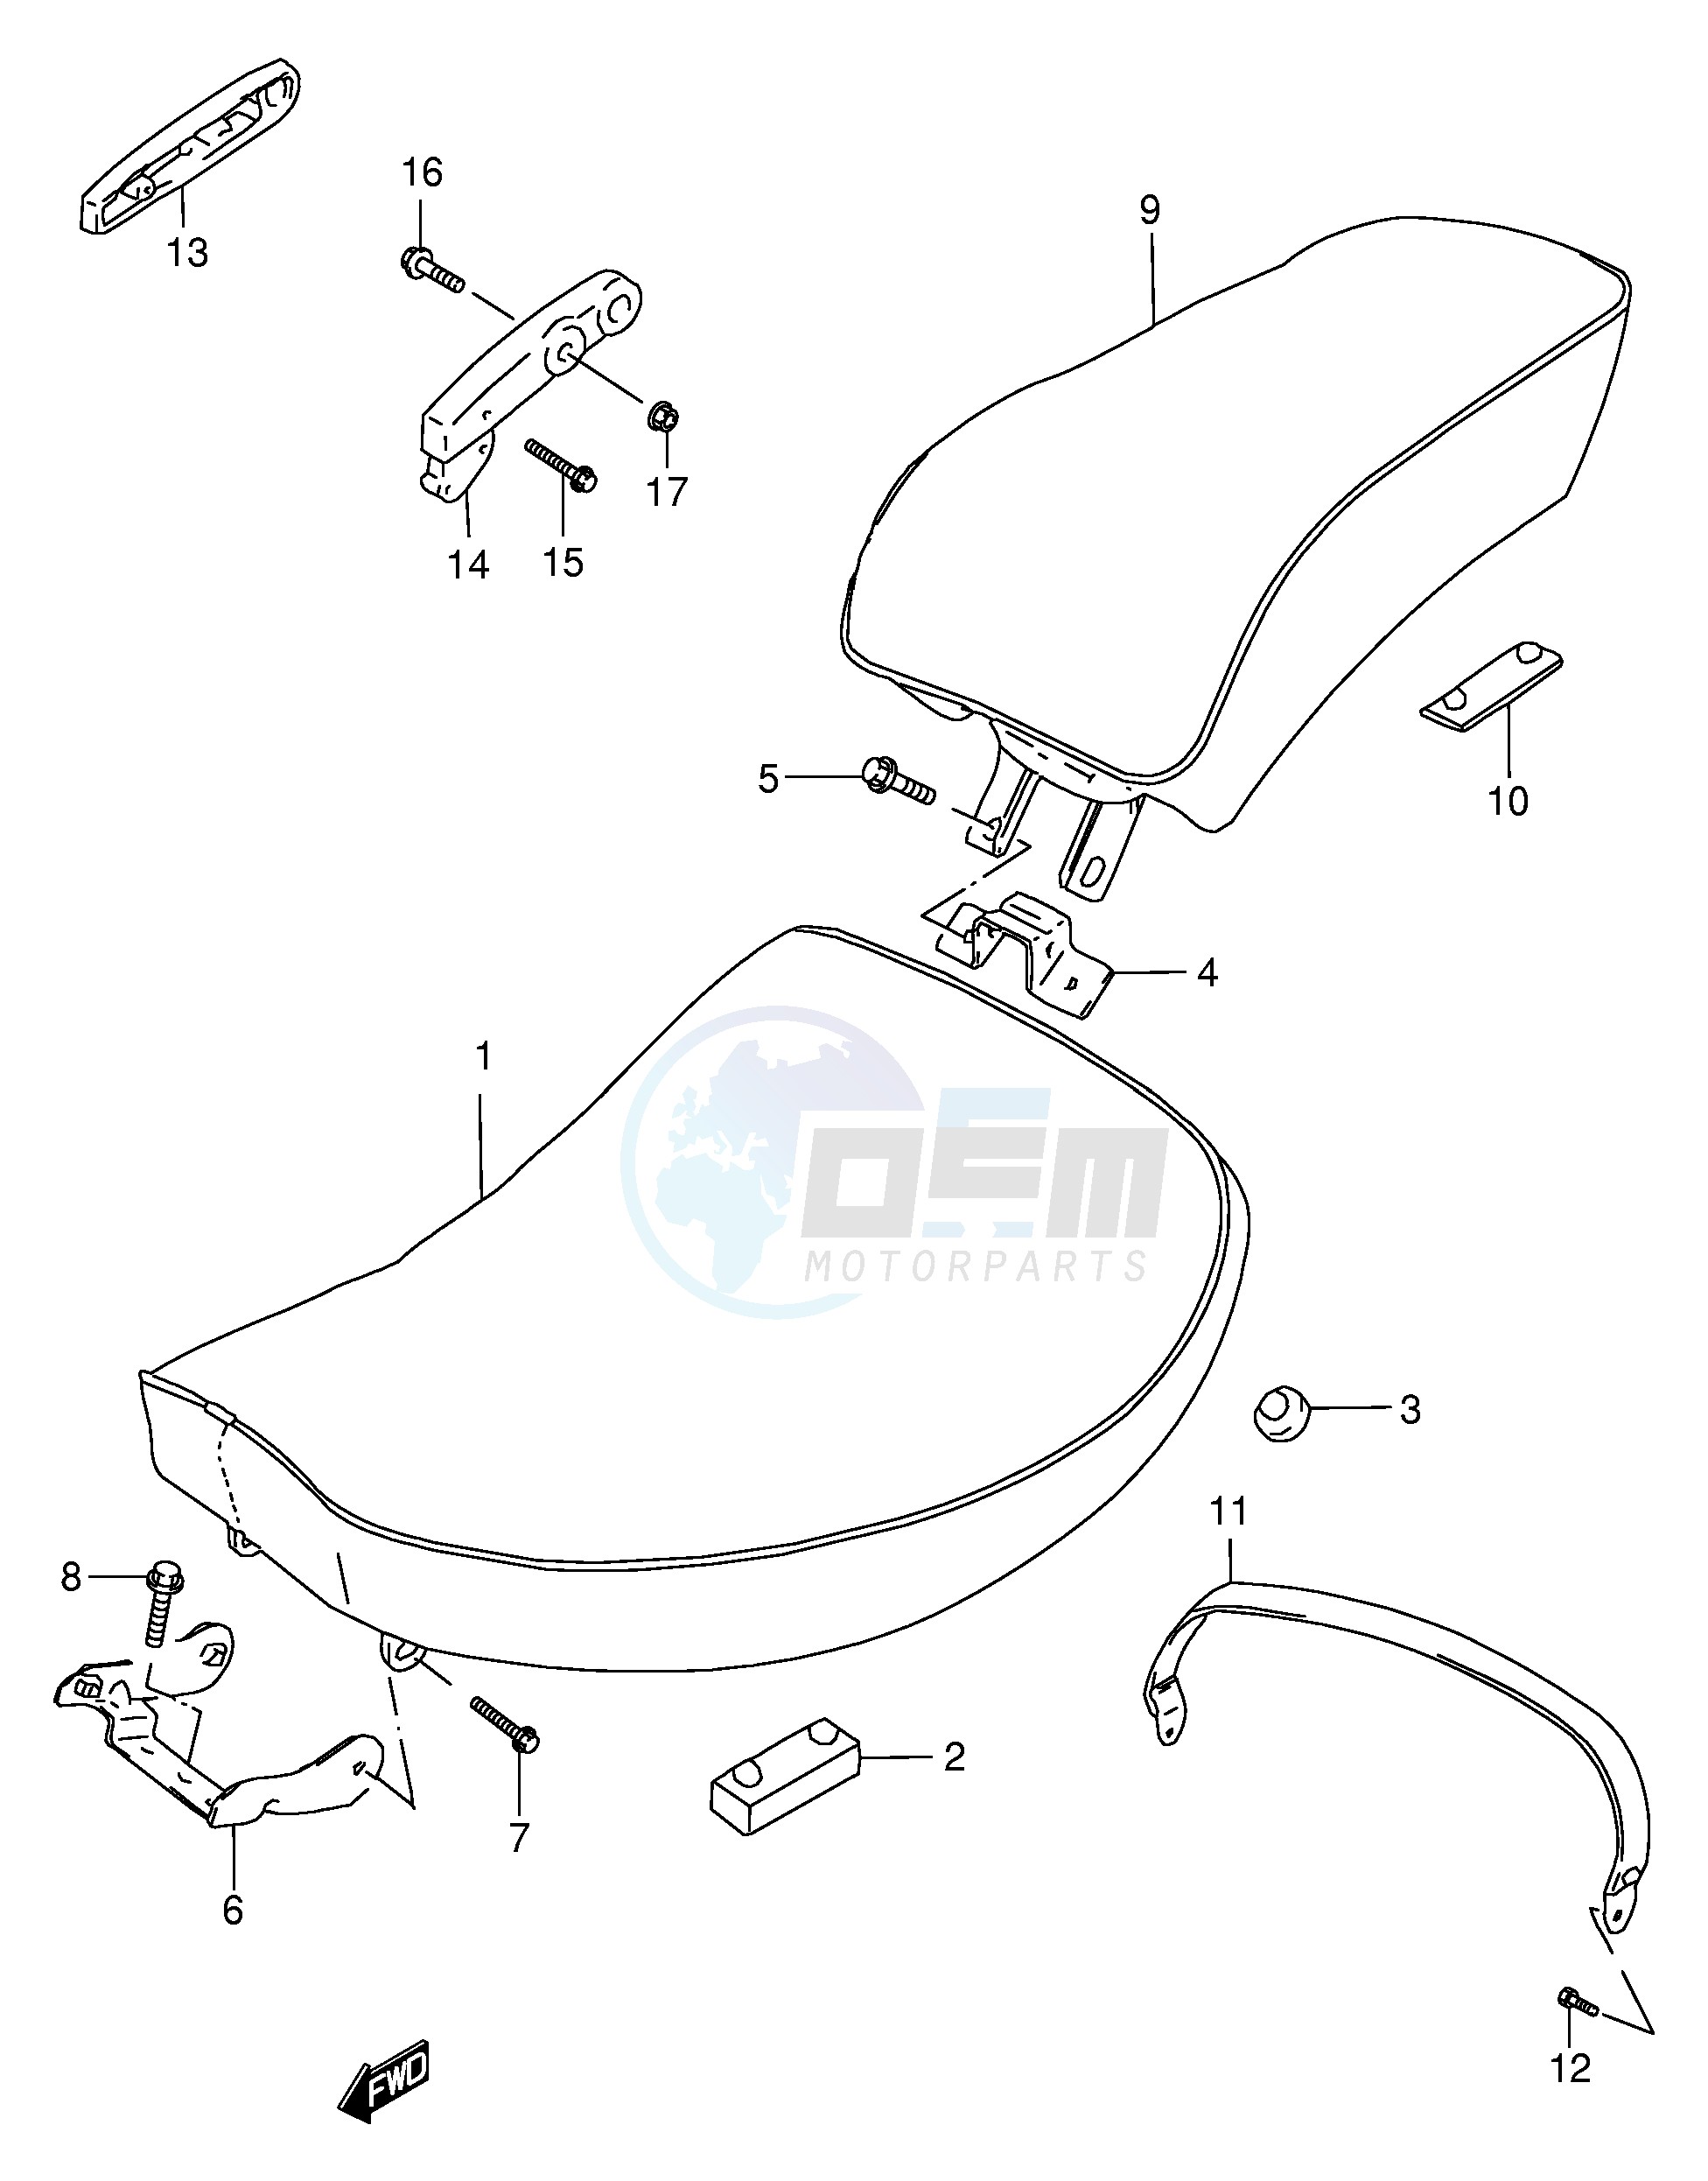 SEAT (SEE NOTE) blueprint